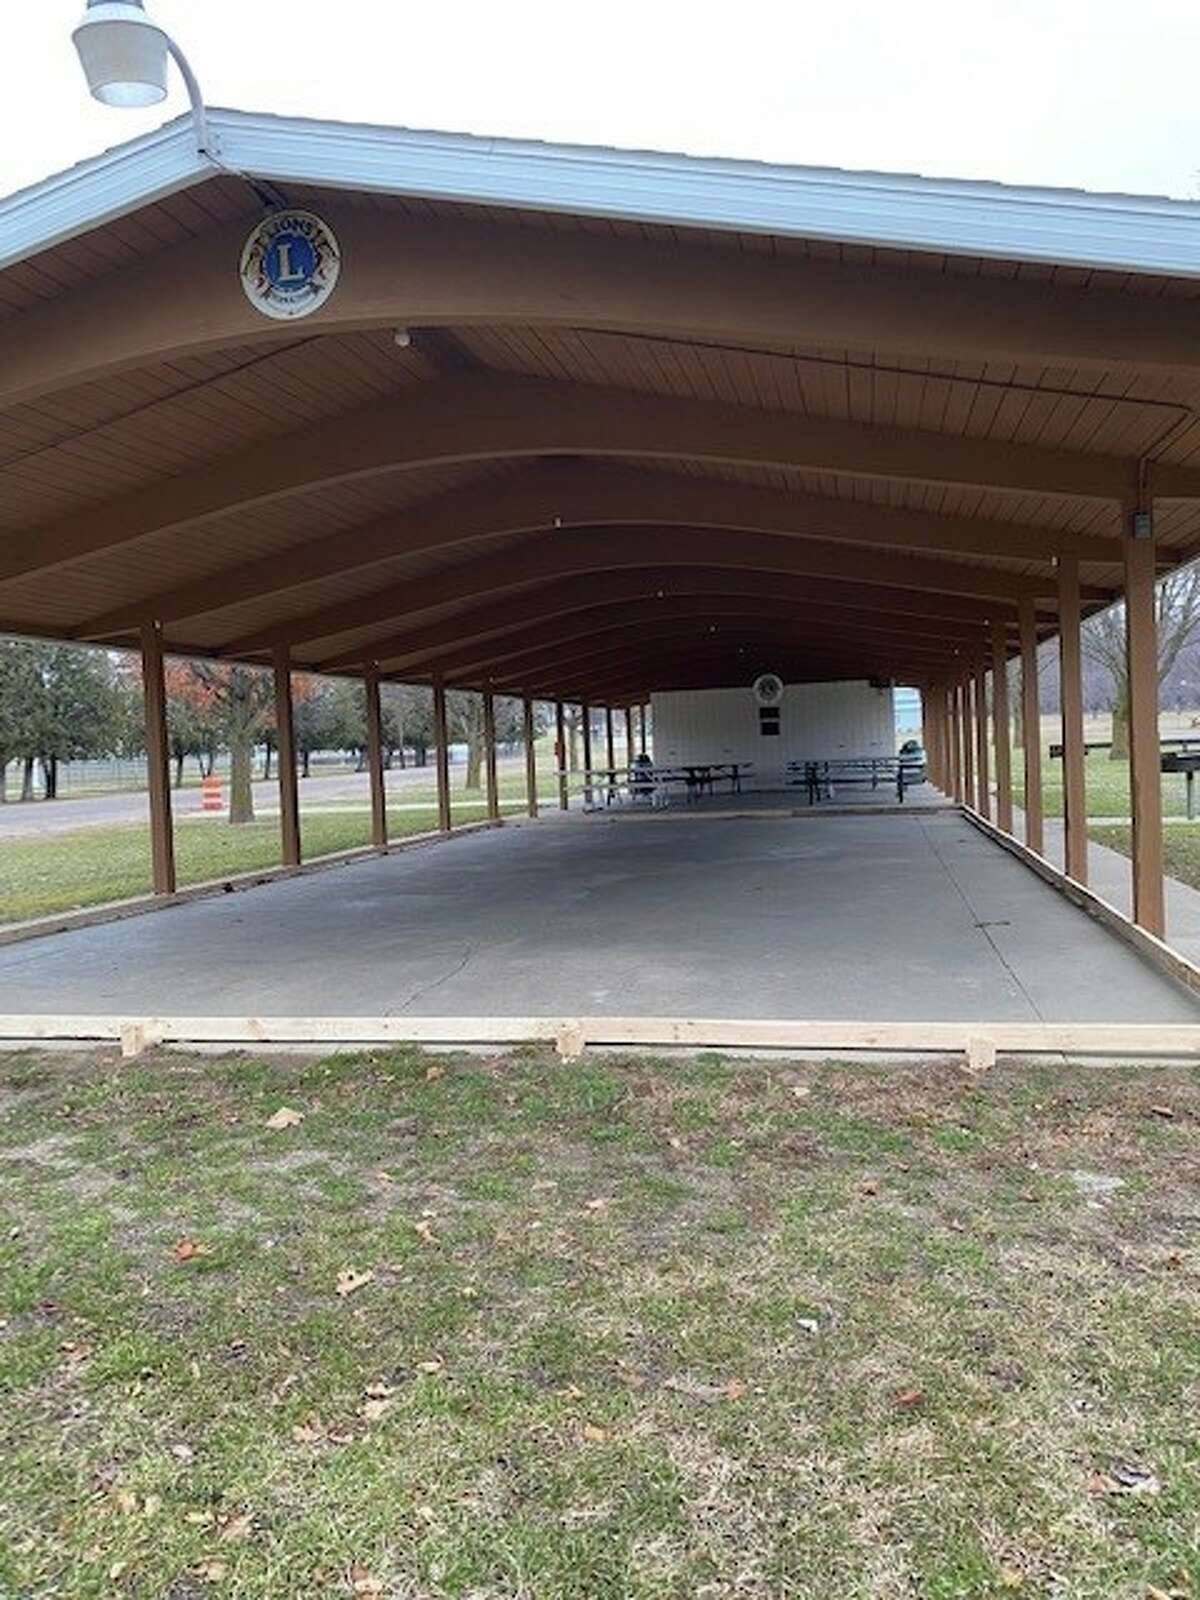 The Lions Club Pavilion, located at Rotary Park, will be turned into an ice-skating rink this week for residents use during the winter season. 